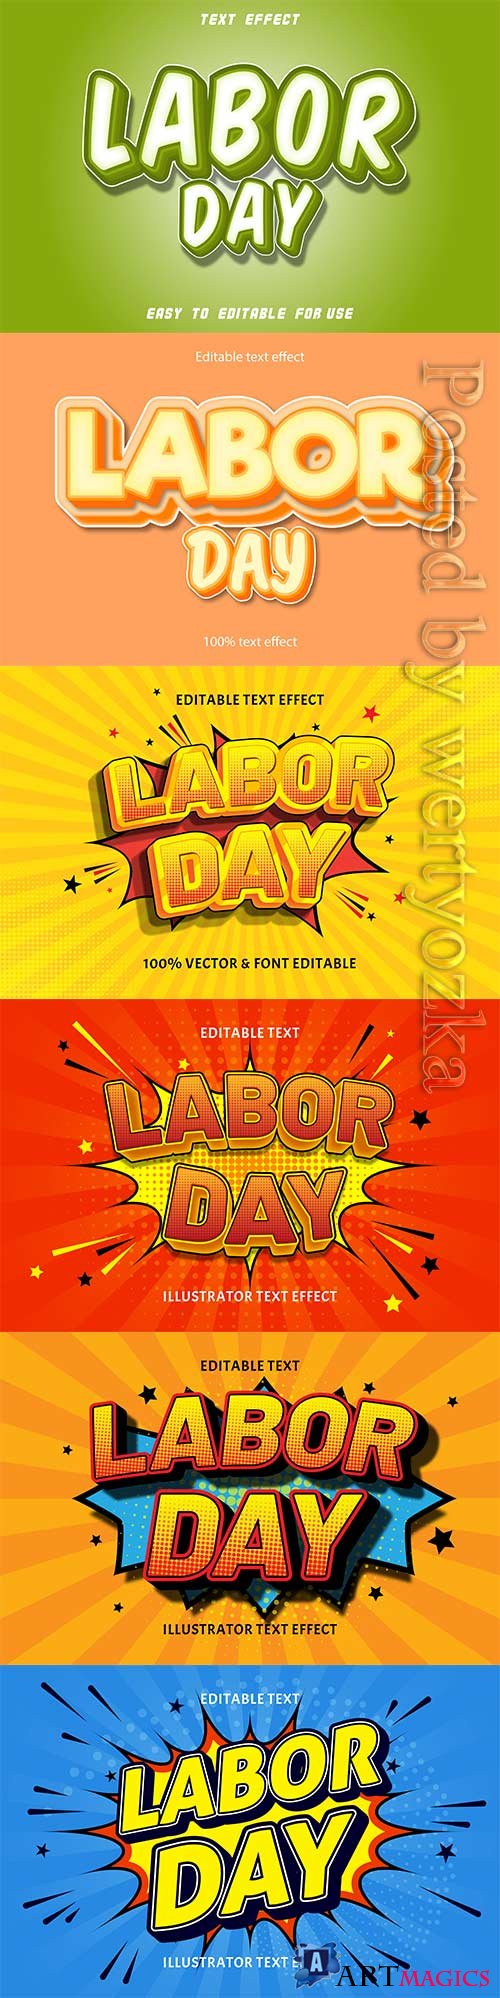 Labor day editable text effect vol 8